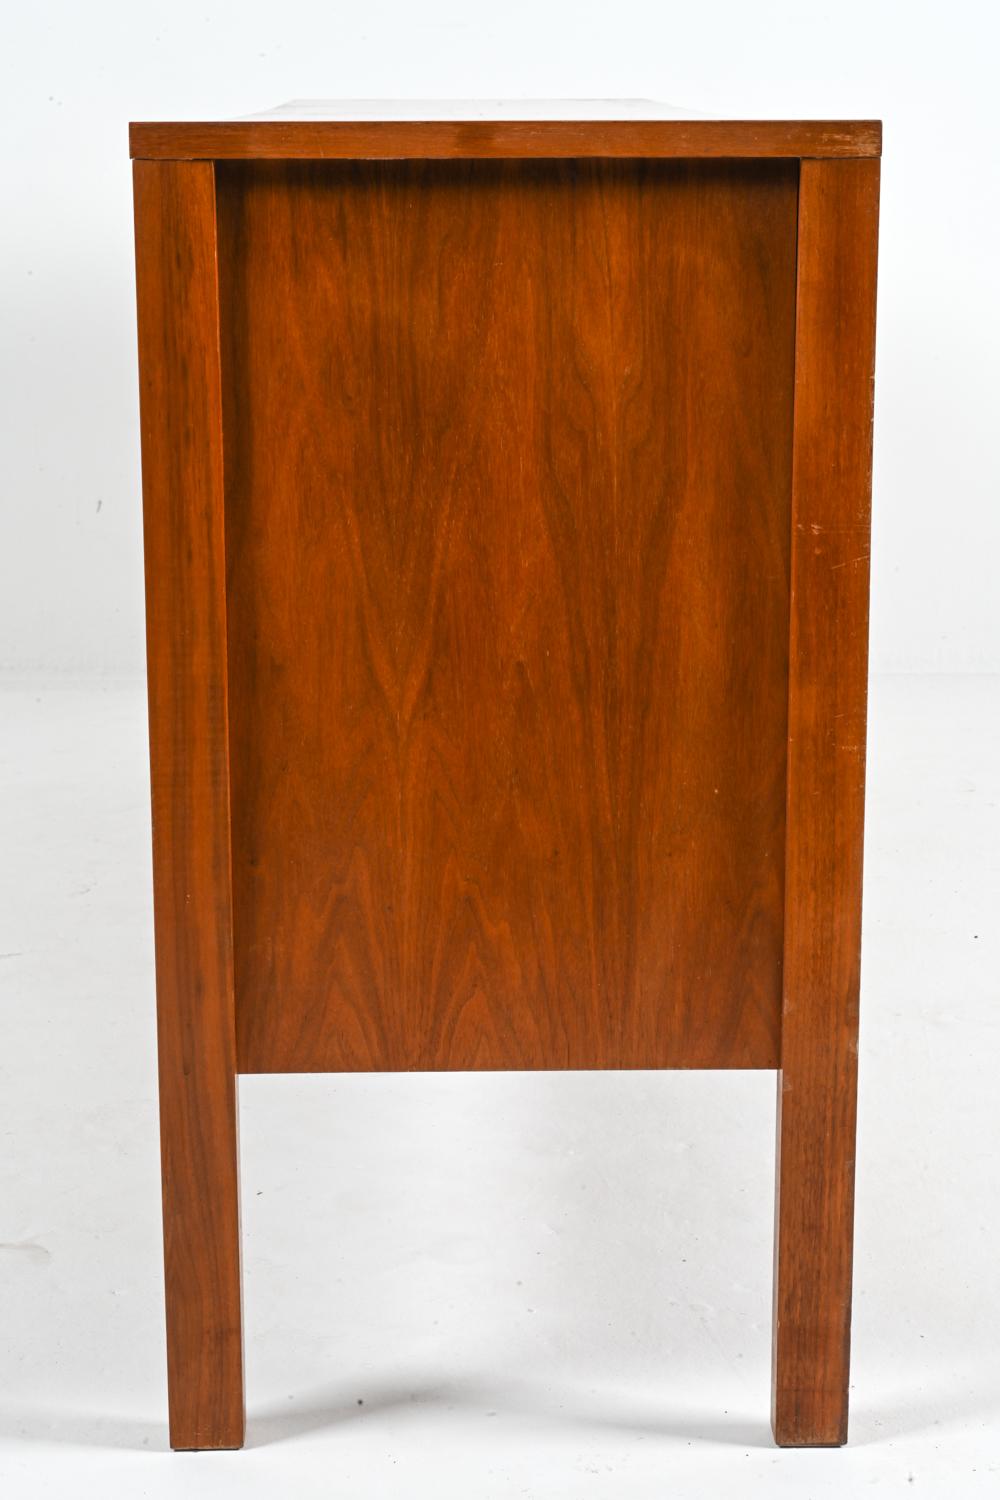 German Mid-Century Teak Woven-Front Sideboard by Leo Bub, c. 1960 For Sale 12